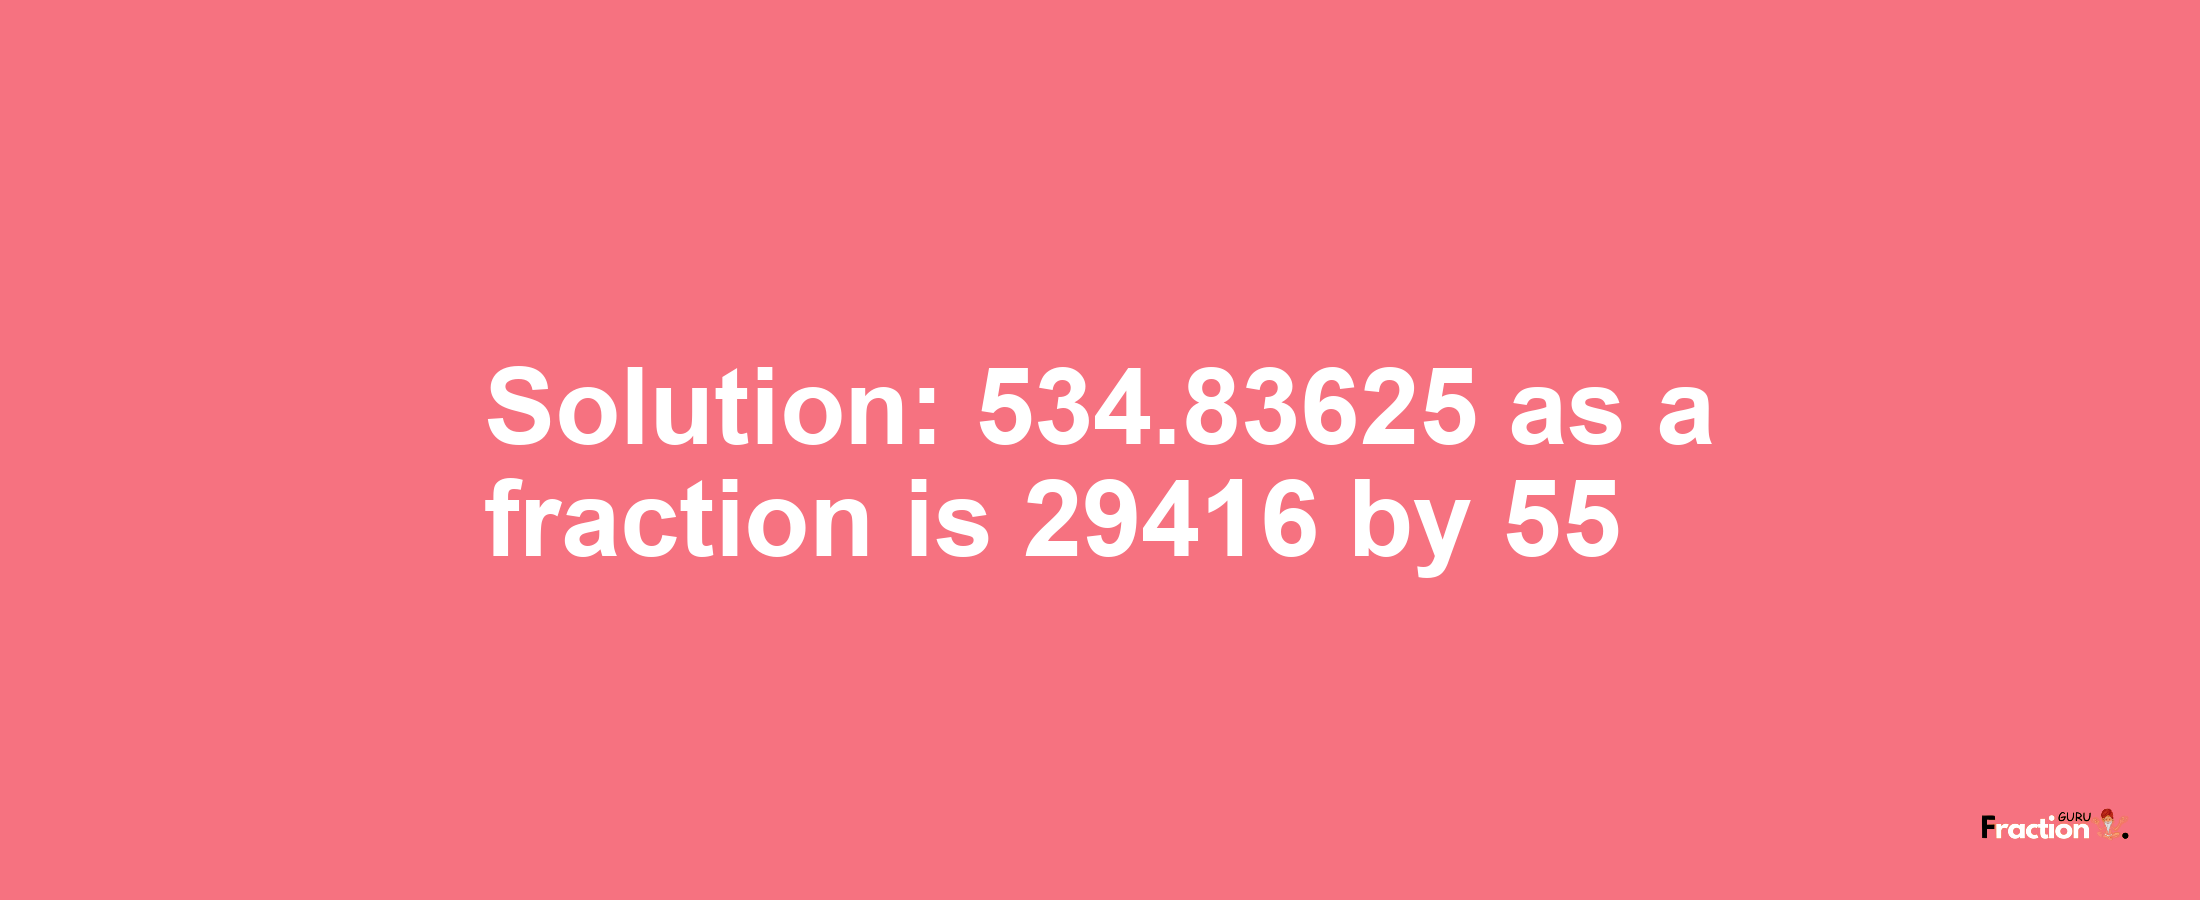 Solution:534.83625 as a fraction is 29416/55